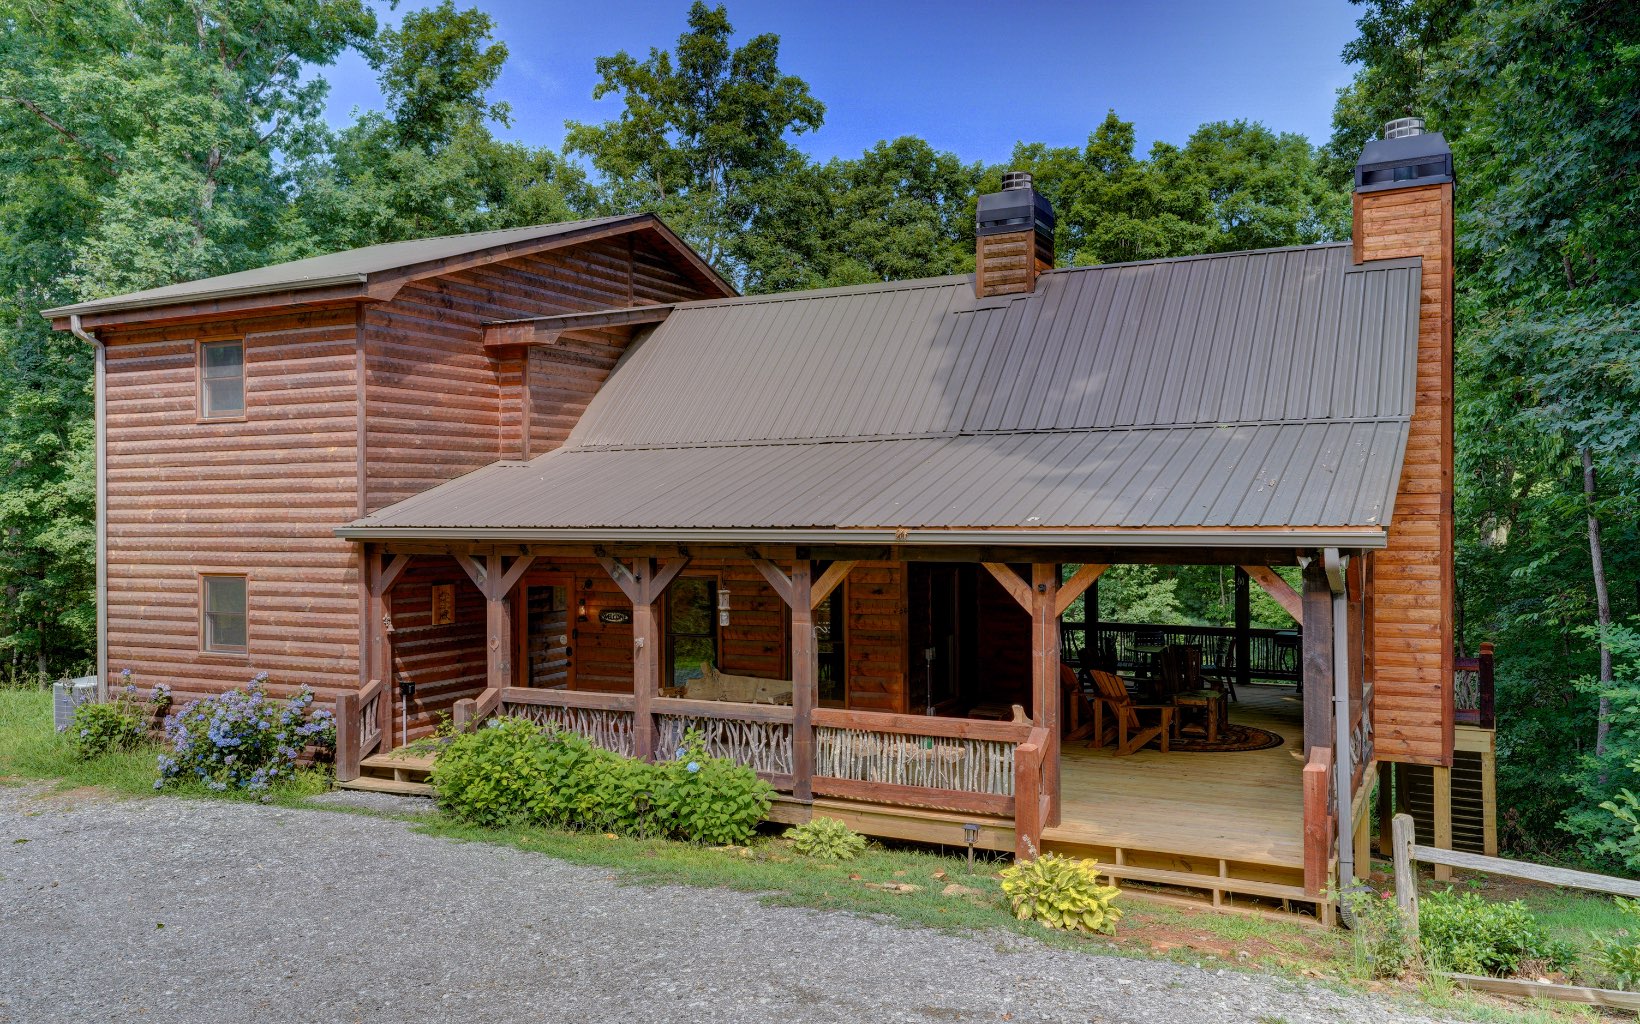 Cozy 3/3 cabin located just outside of downtown Blue Ridge w/ deeded Toccoa River access! Entering the home you will be welcomed by a soaring vaulted ceiling and beautiful floor to ceiling rock fireplace. To your left you will have the beautiful kitchen w/ granite counter tops and dining room table. Additionally on the main floor is a bedroom and full bath. Upstairs will bring you to the loft and master bedroom. The loft is used for additional beds but would make for a great office space! The master bath has a huge walking in shower and Jack & Jill style vanity w/ granite to match the kitchen countertops. The basement offers an additional bedroom, full bath, laundry room, storage room, and game room. Walk outside to an amazing porch w/ wood burning fireplace and a short walk to the community area down by the Toccoa River! This home would make for a great vacation rental or second home!